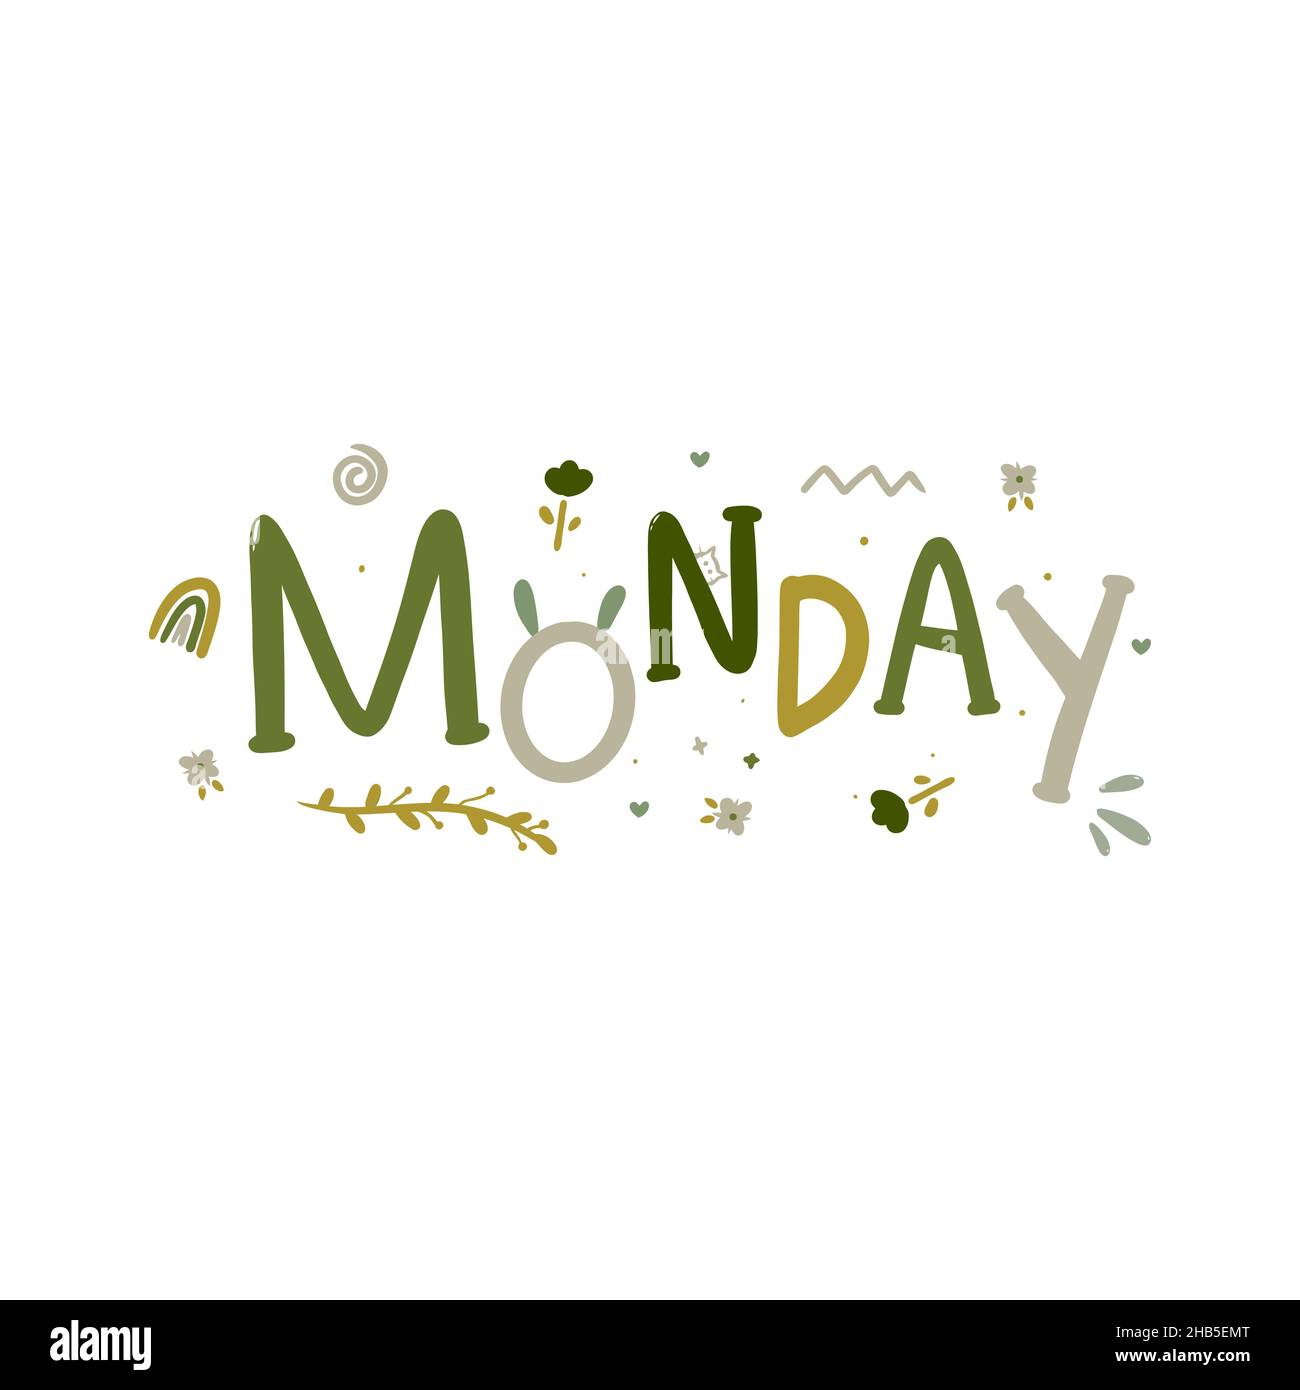 Awesome Monday Weekday Typography Doodle Vector Stock Vector